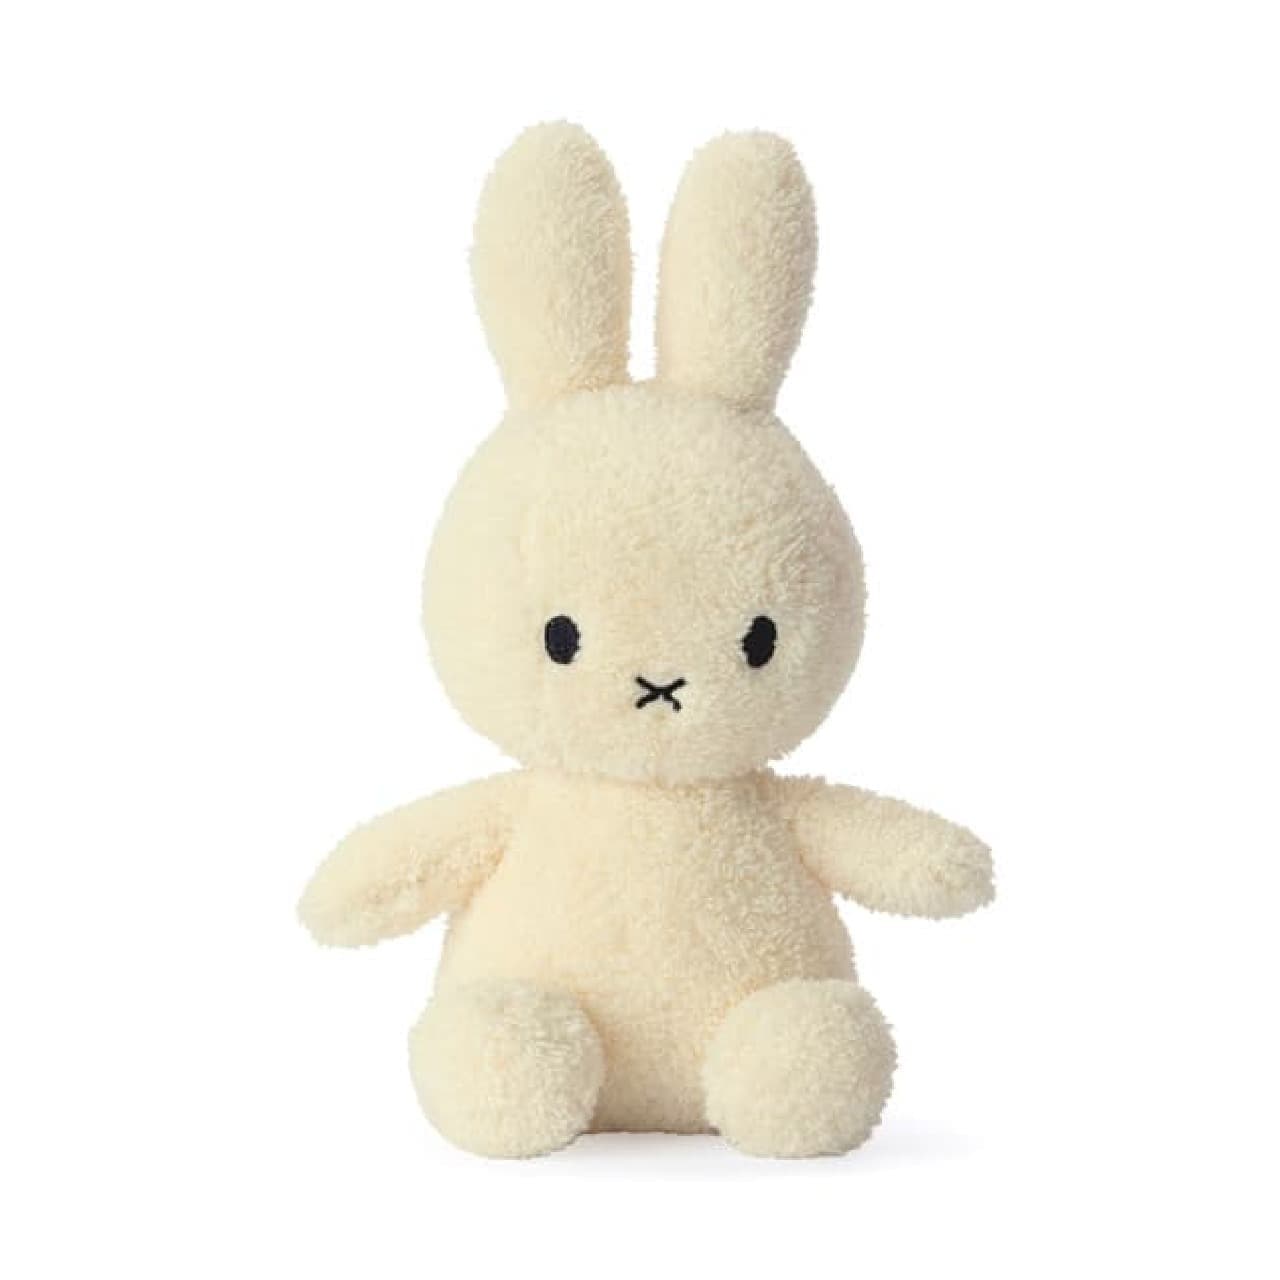 New Miffy Plush "Terry Collection" Plush Toys with Chiffon Cake-like Feel: Snuffy Boris Also Available